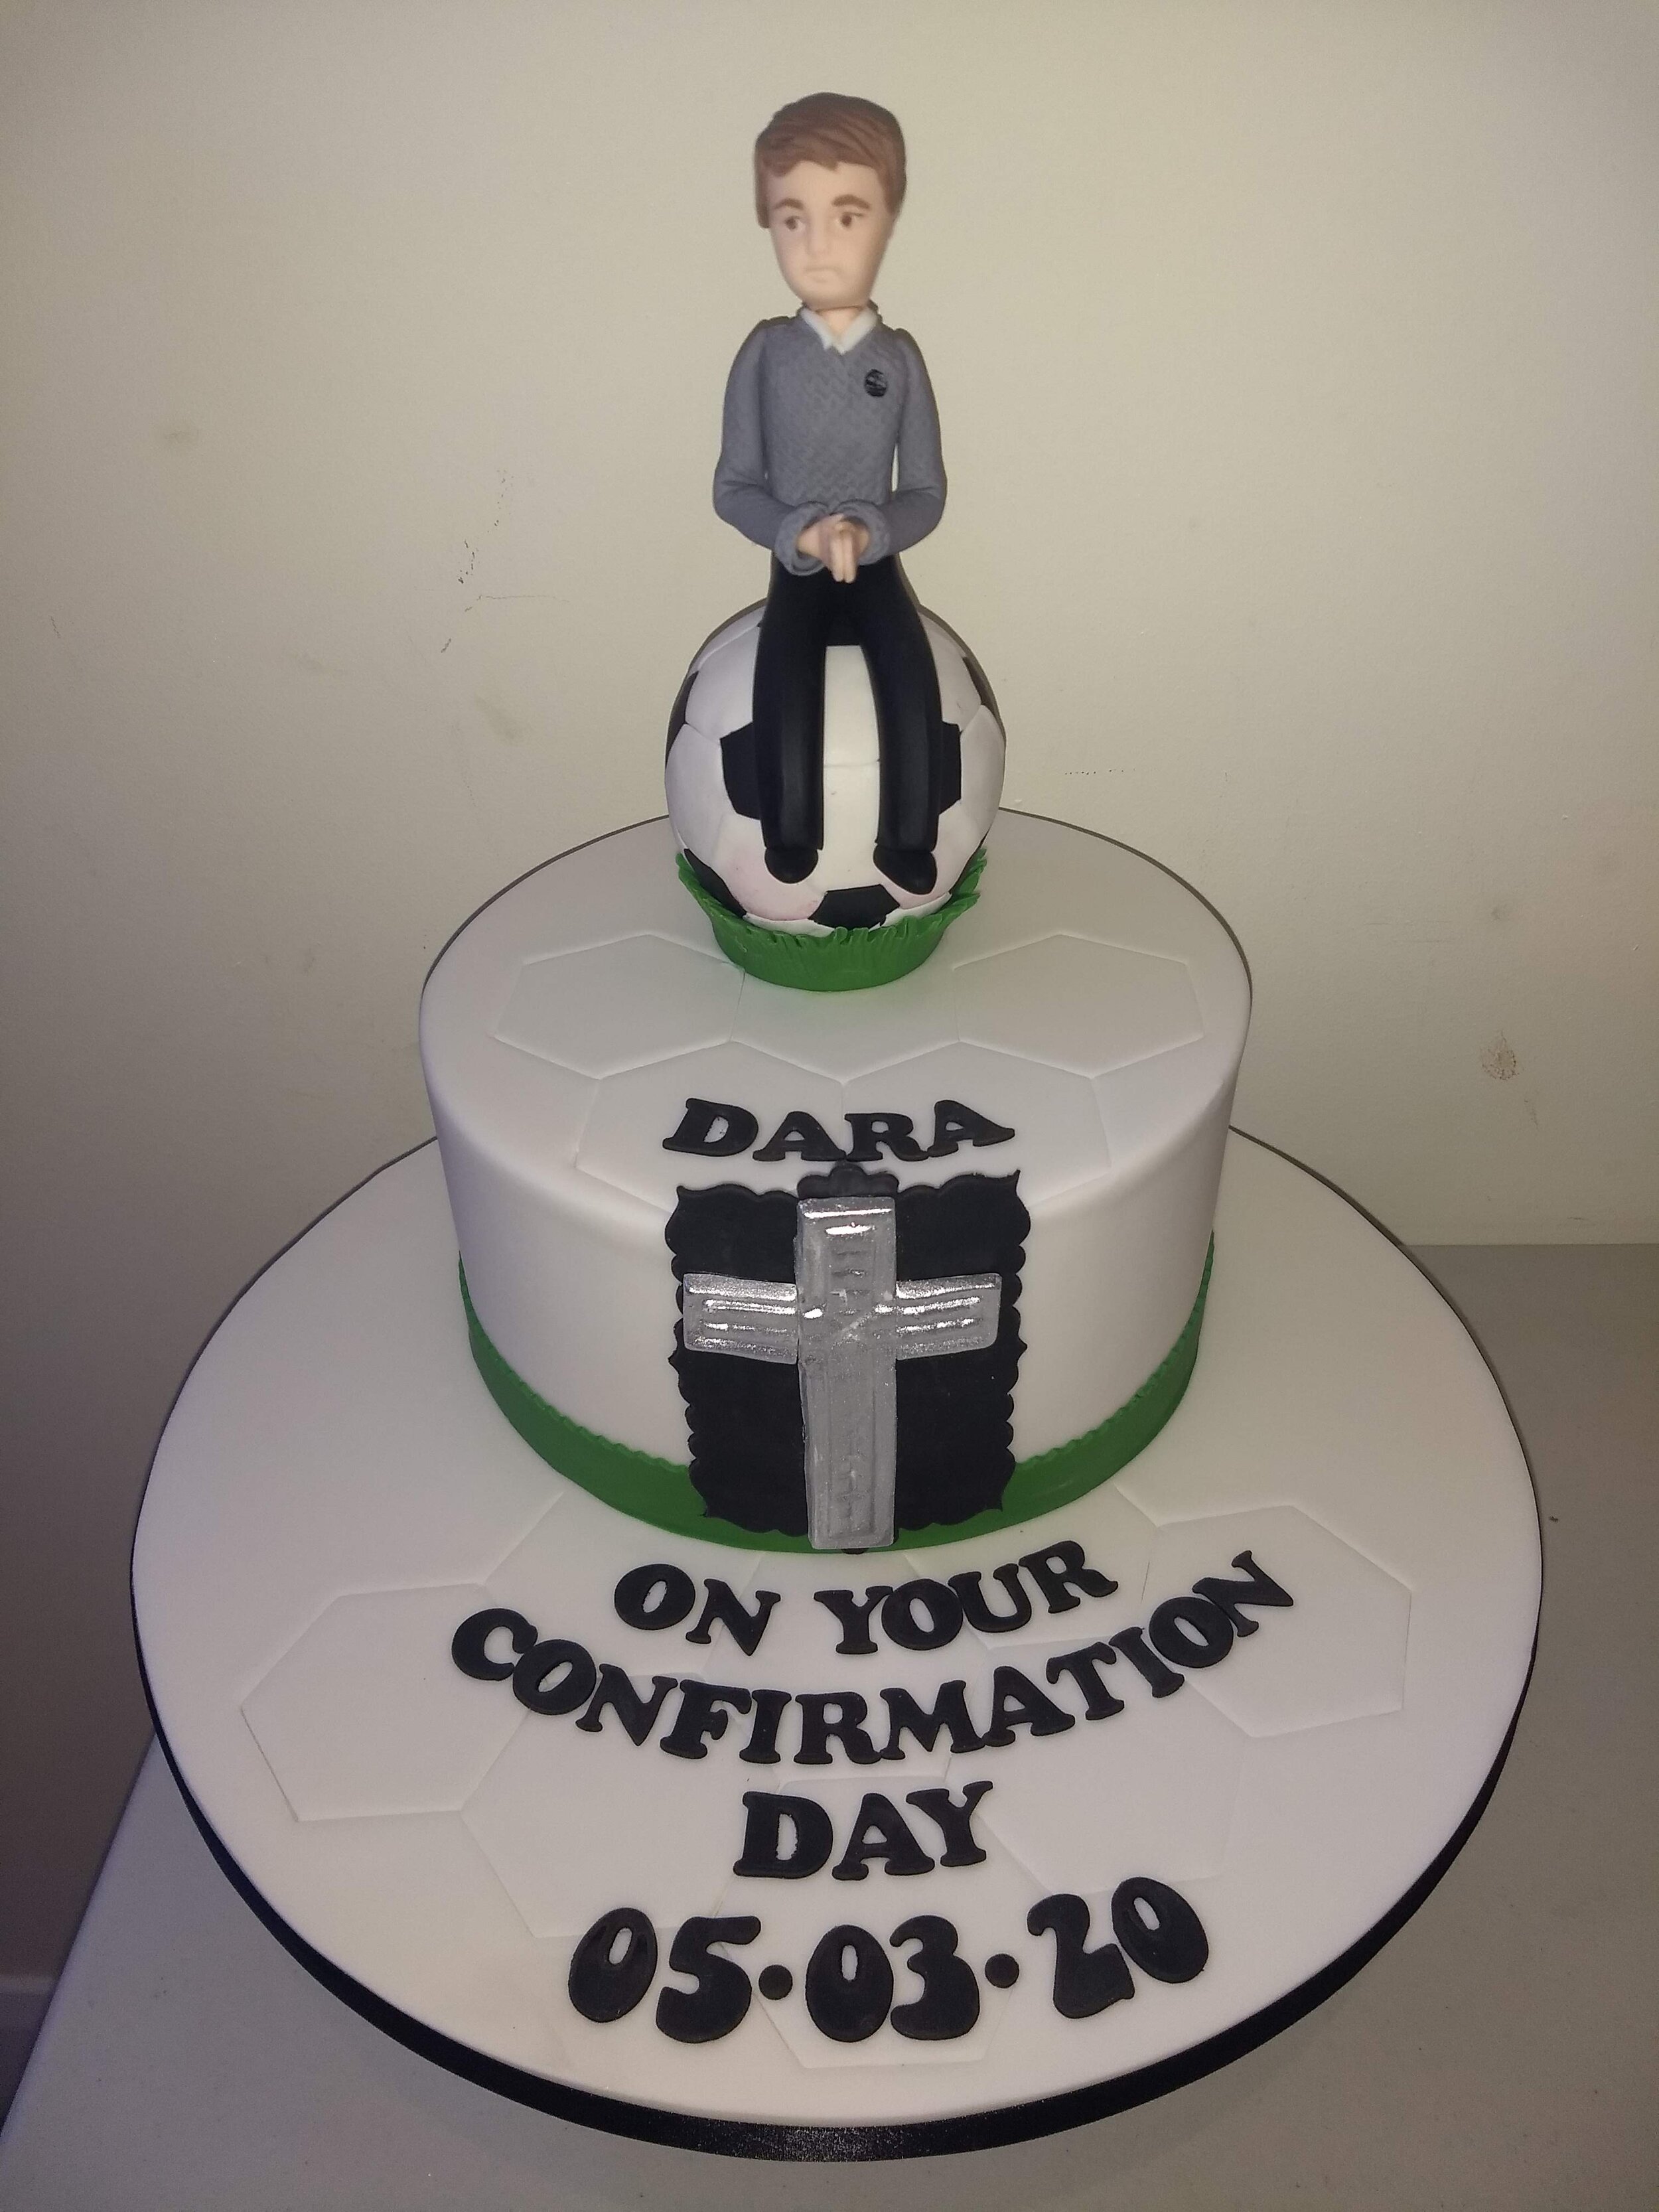 Christening Cakes – The Icing on The Cake